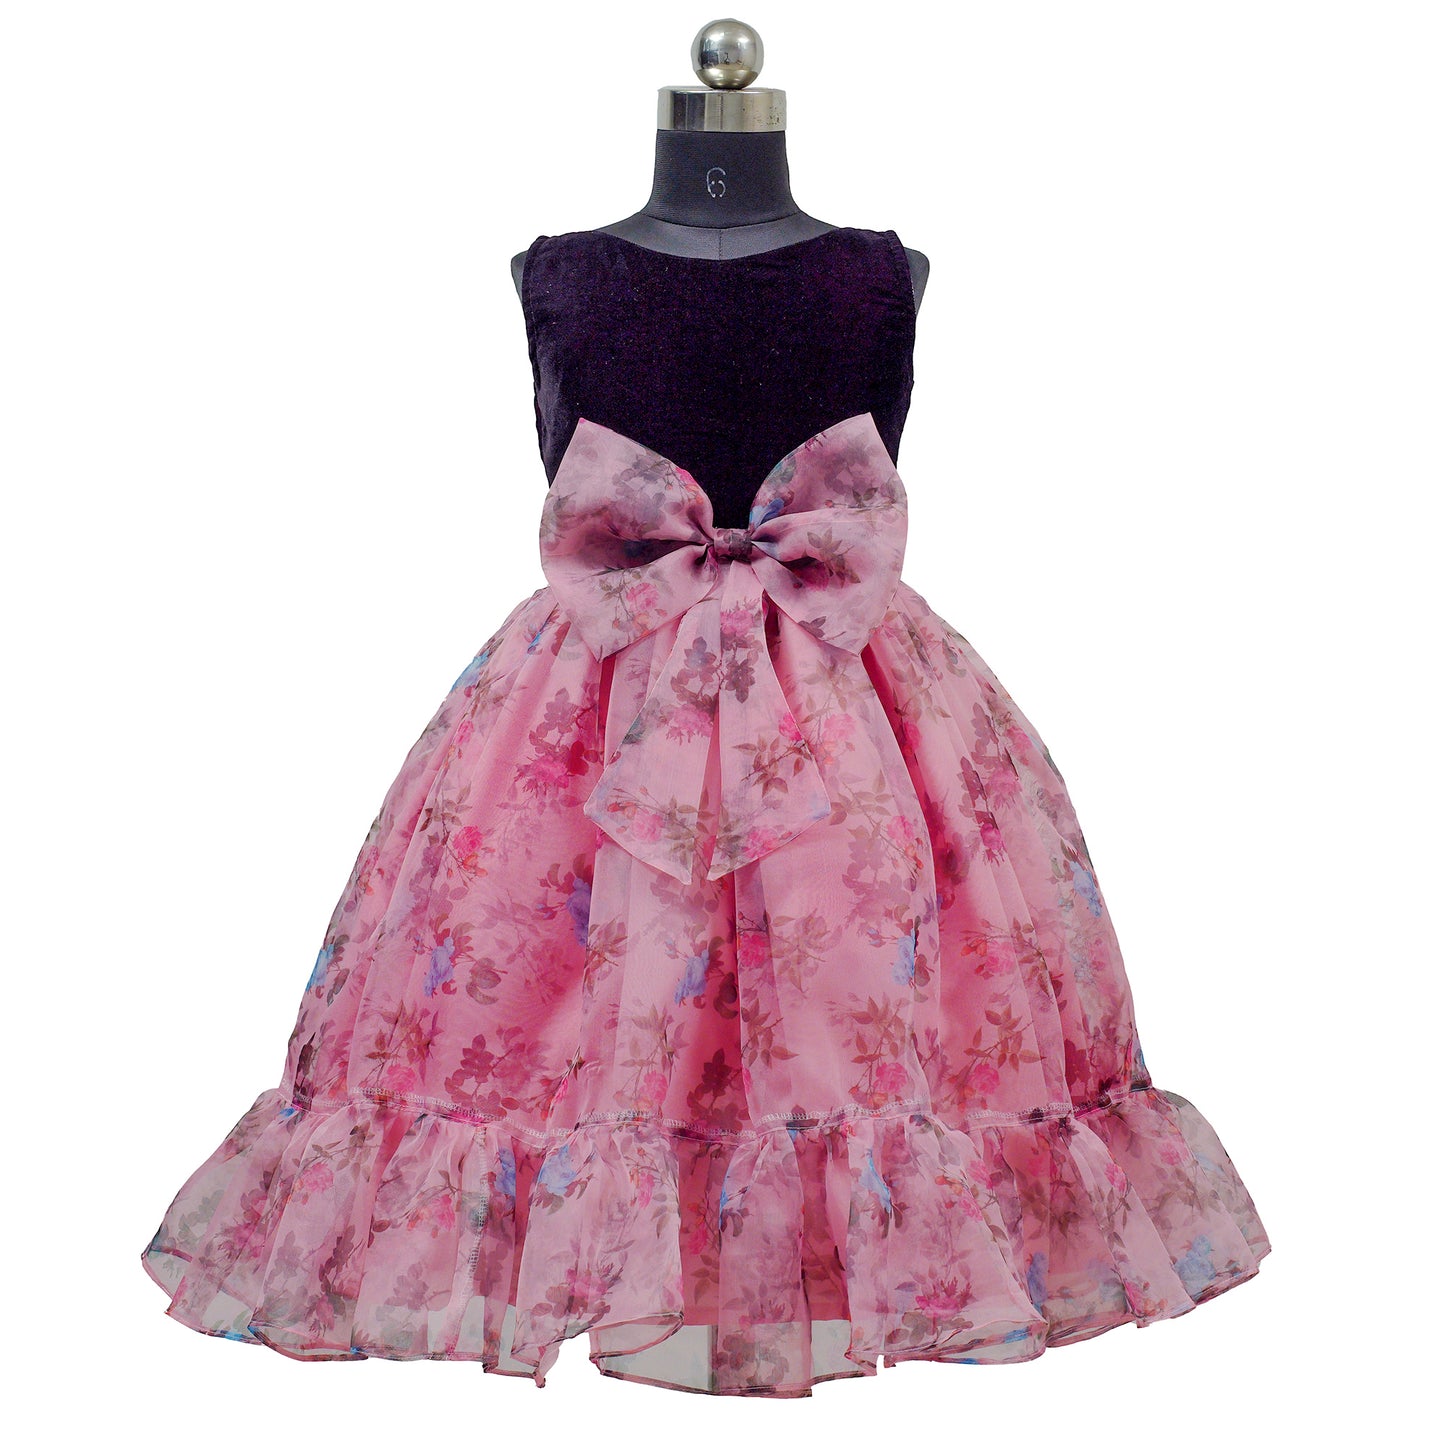 HEYKIDOO new design party wear dress latest designer kids girls clothing stylish comfortable party frock 2023 floral organza velvet pink & purple knee length birthday party dress online shopping India Designer Christmas Dresses for Girls New Arrivals in Kids' Fashion Cute Christmas Outfits Top Online Retailers for Kids' Fashion Exclusive Holiday Dress Deals